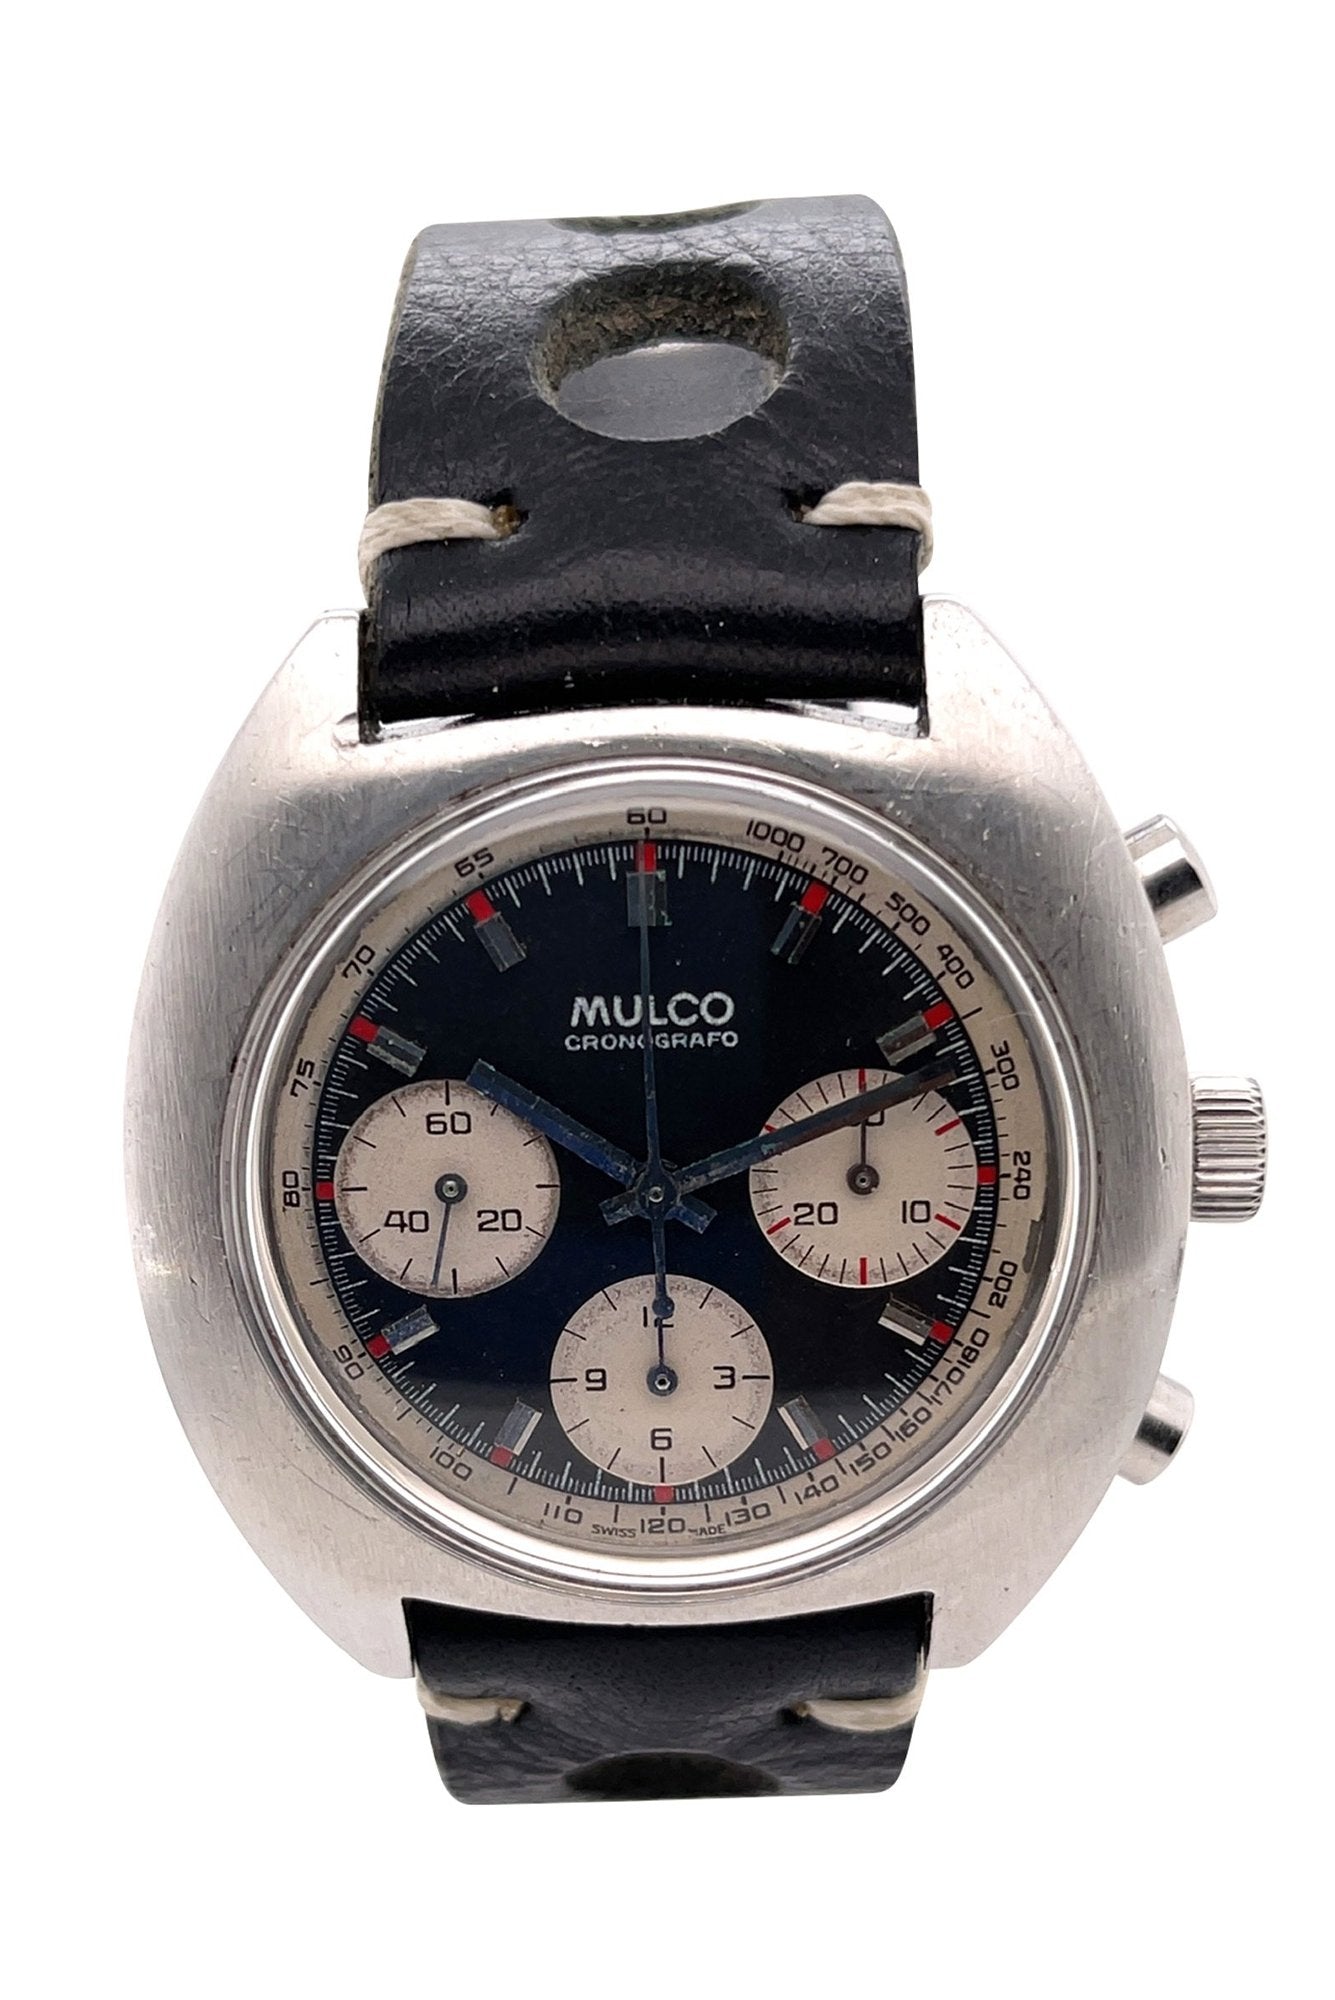 Mulco Chronograph - Counting Time Watch Purveyors